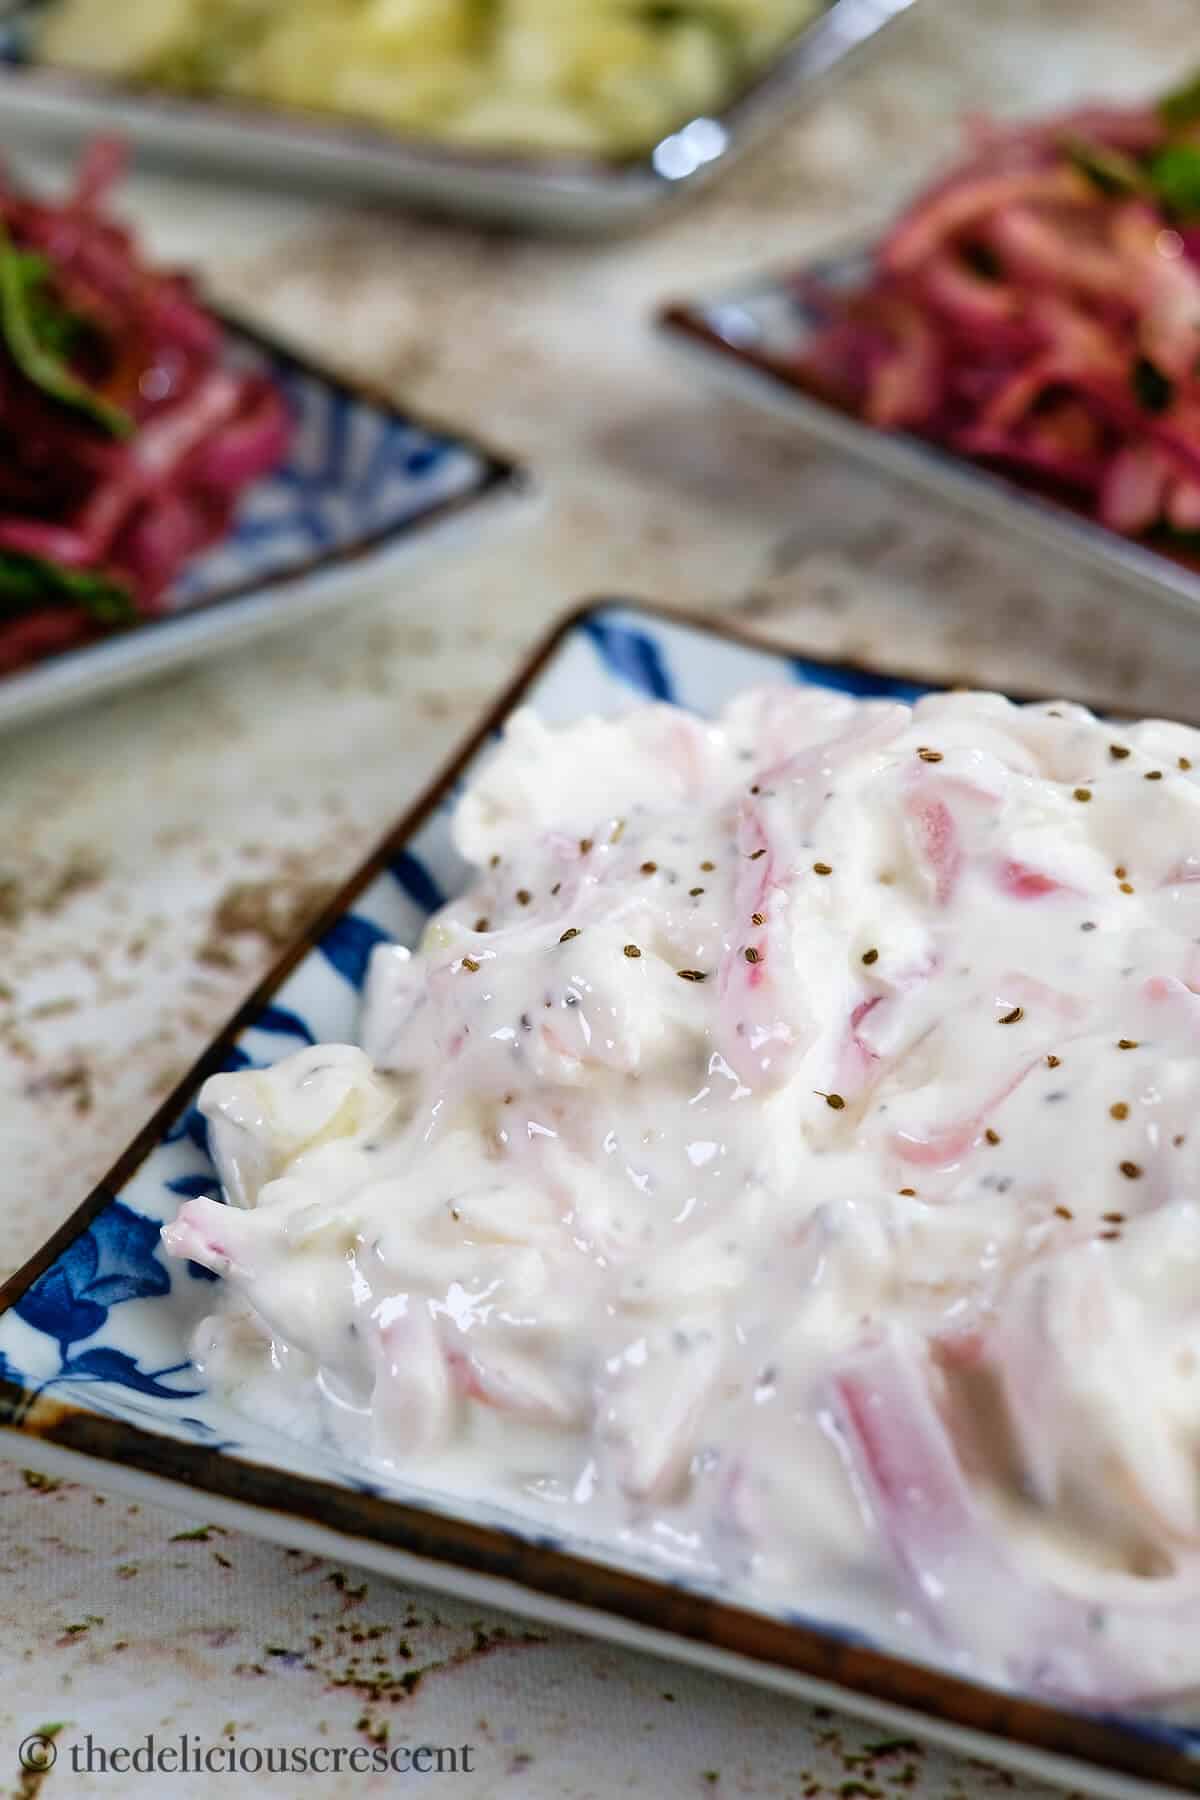 Creamy onion salad in a plate.